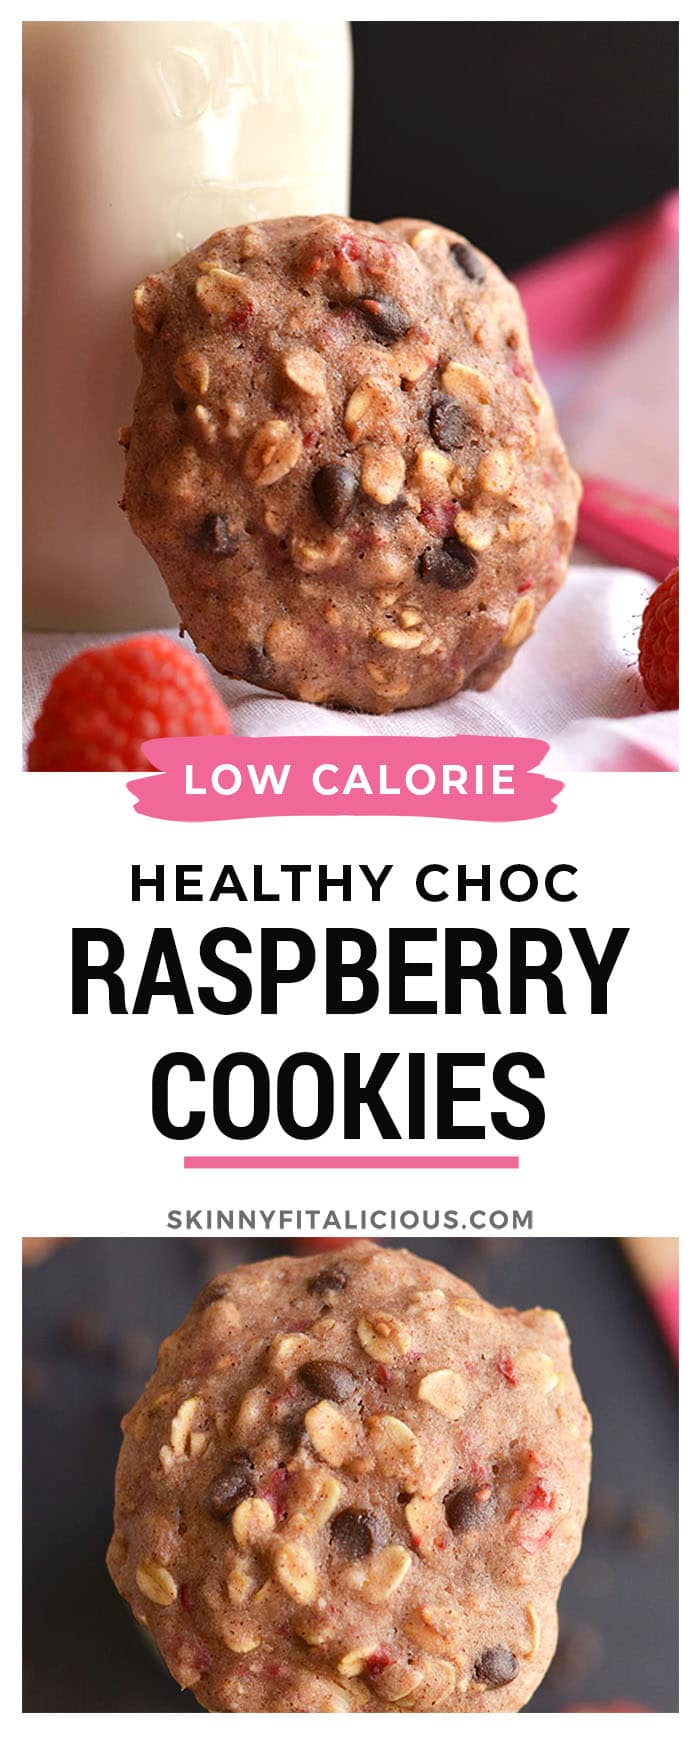 Raspberry Chocolate Oatmeal Cookies! An easy recipe for soft baked oatmeal cookies made with wholesome ingredients. Healthy enough for breakfast and sweet enough for a snack!